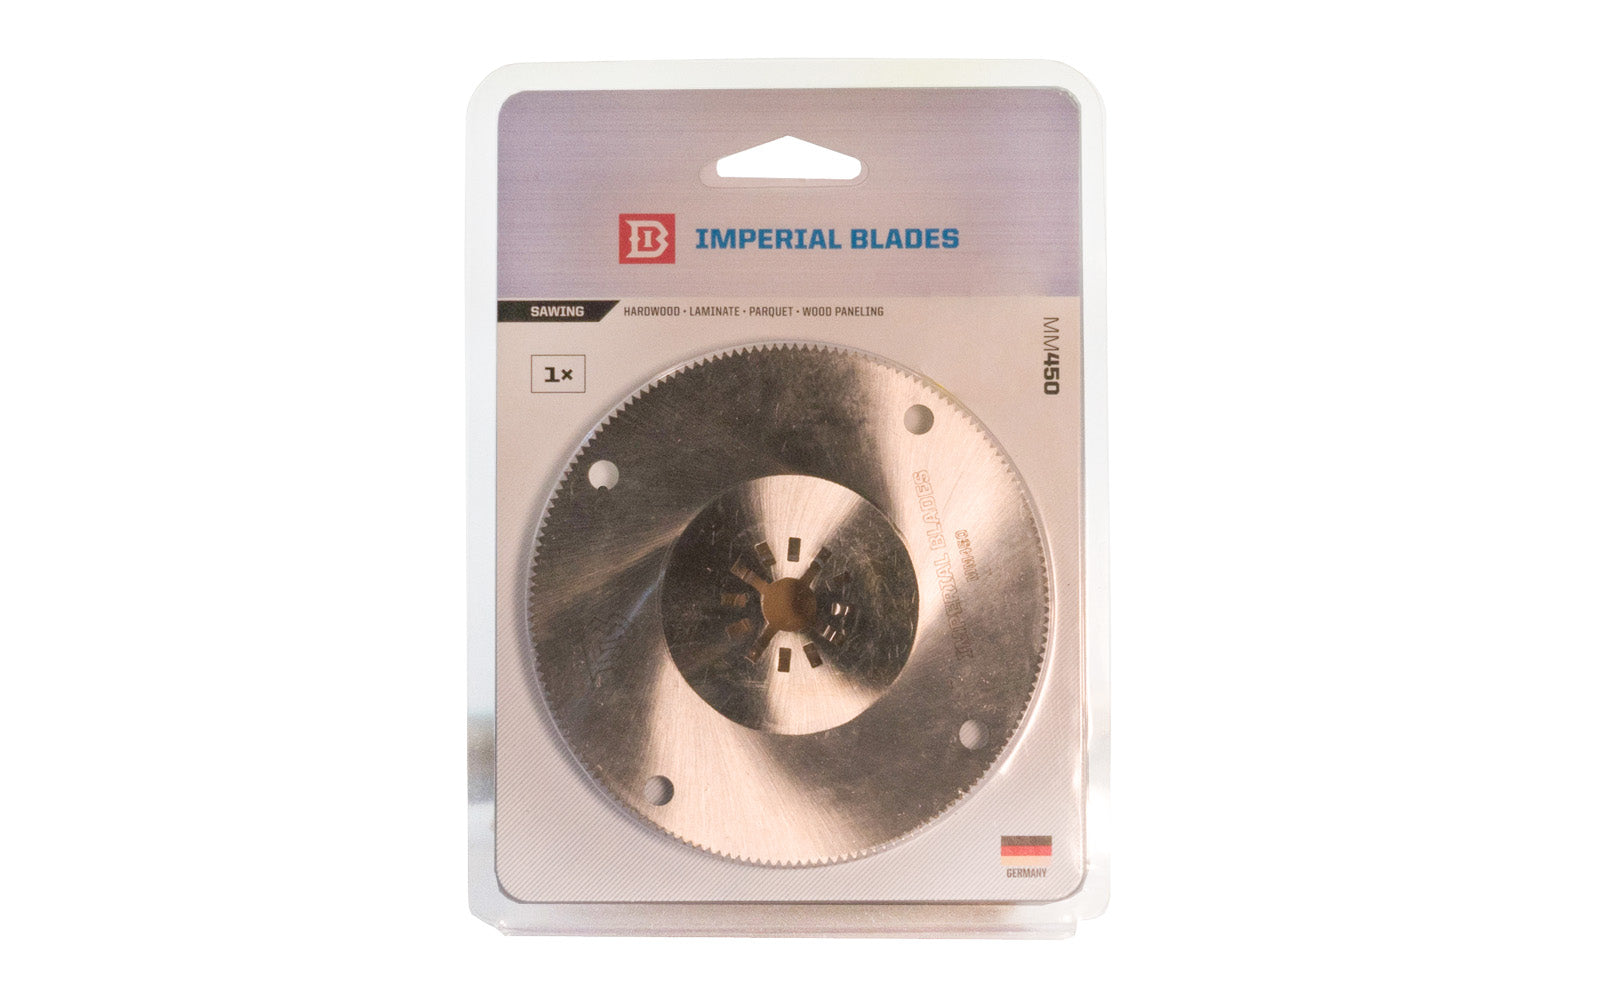 Imperial Blades Round Saw Blade - MM450. For sawing hardwood, laminate, parquet, wood paneling. 736211673244